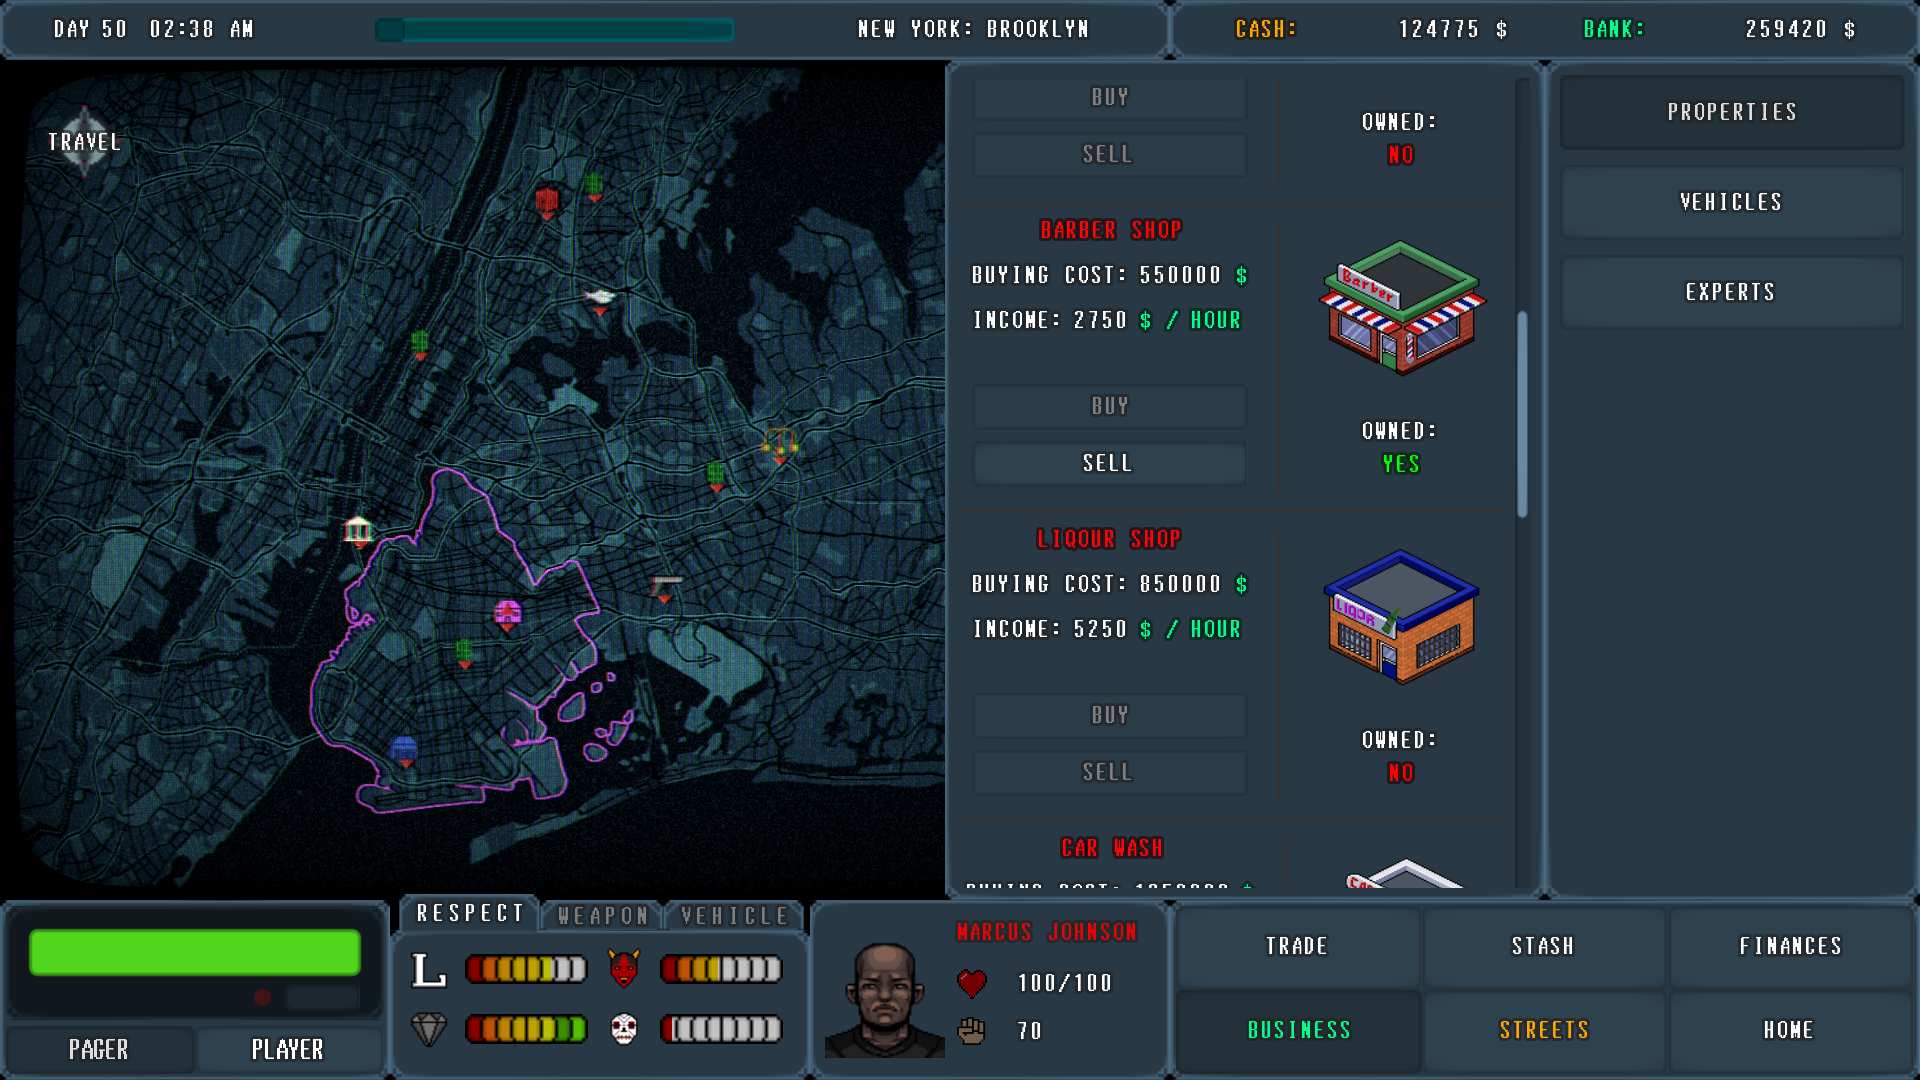 Screenshoot of game PUSHER - DRUG TYCOON showing some of properties to buy